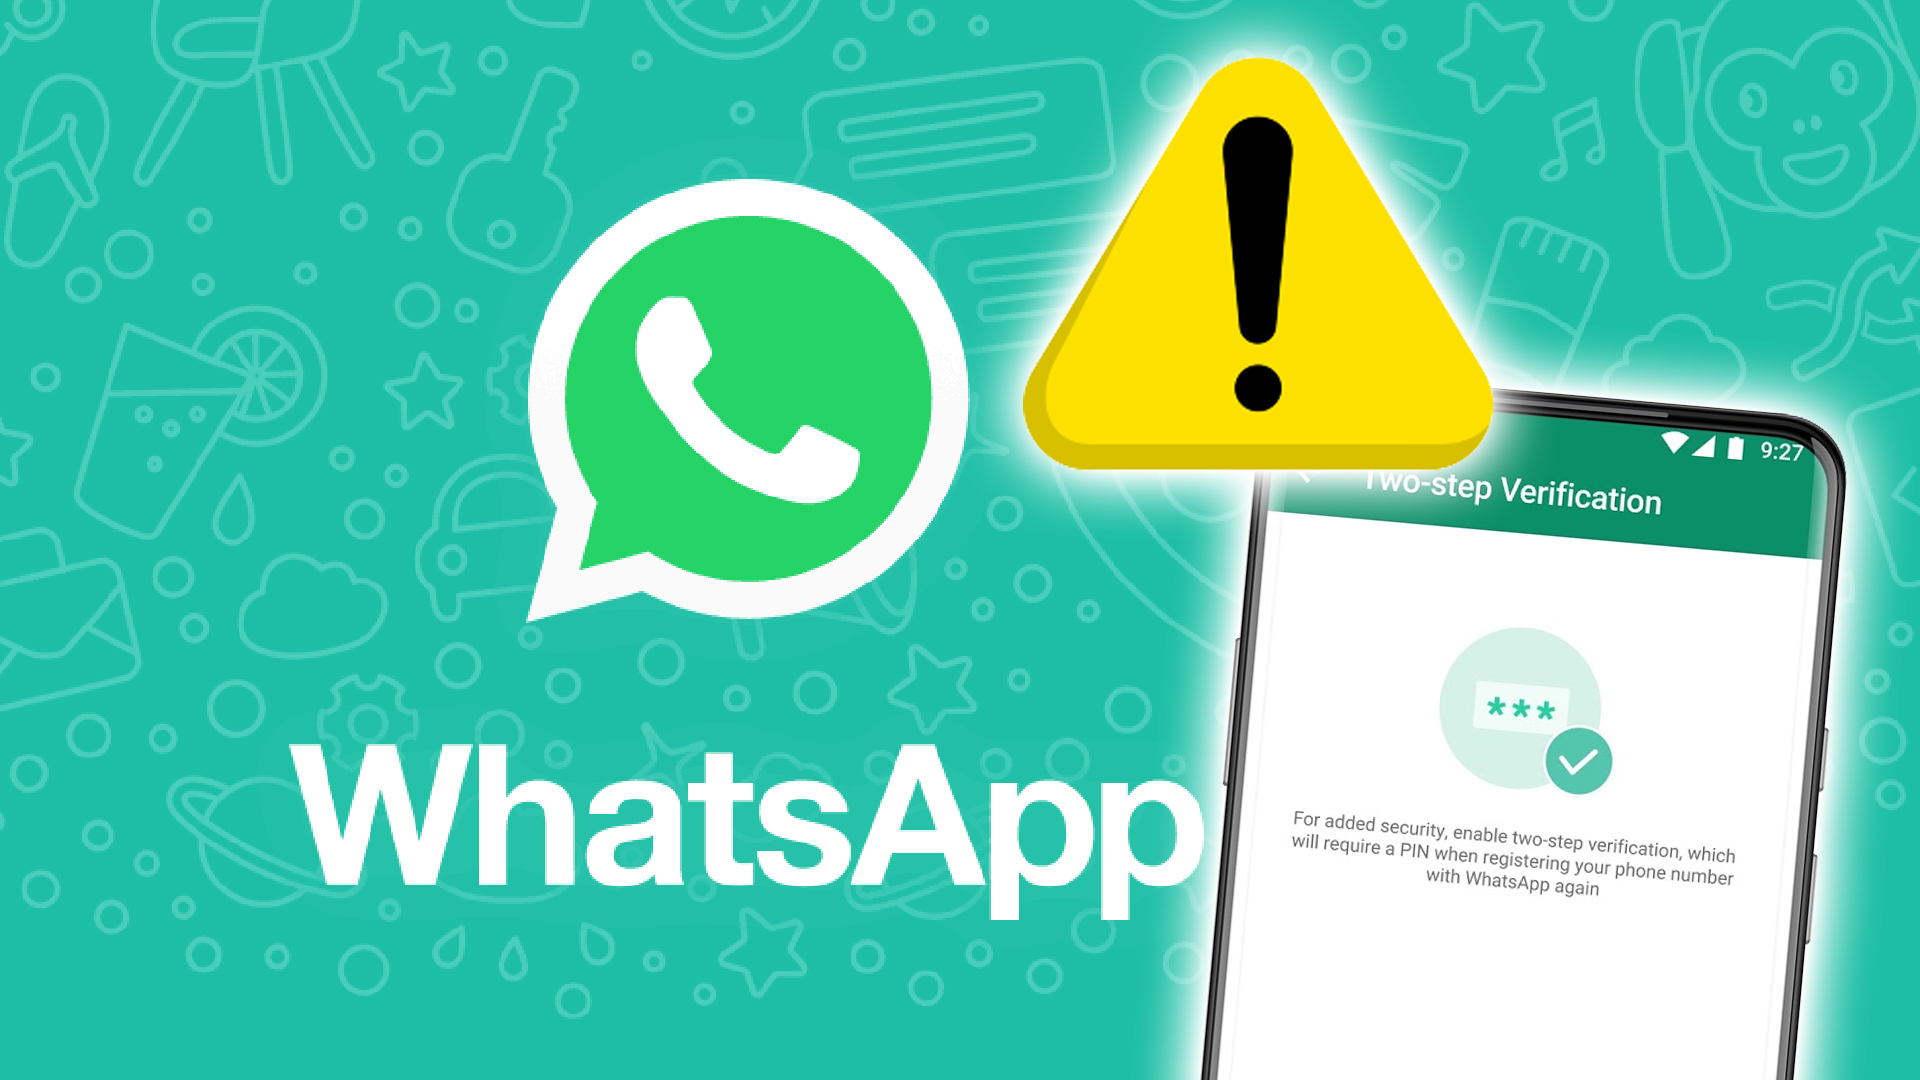 Top 6 Blunders You’re Making in WhatsApp Unknowingly and How To Fix Them?